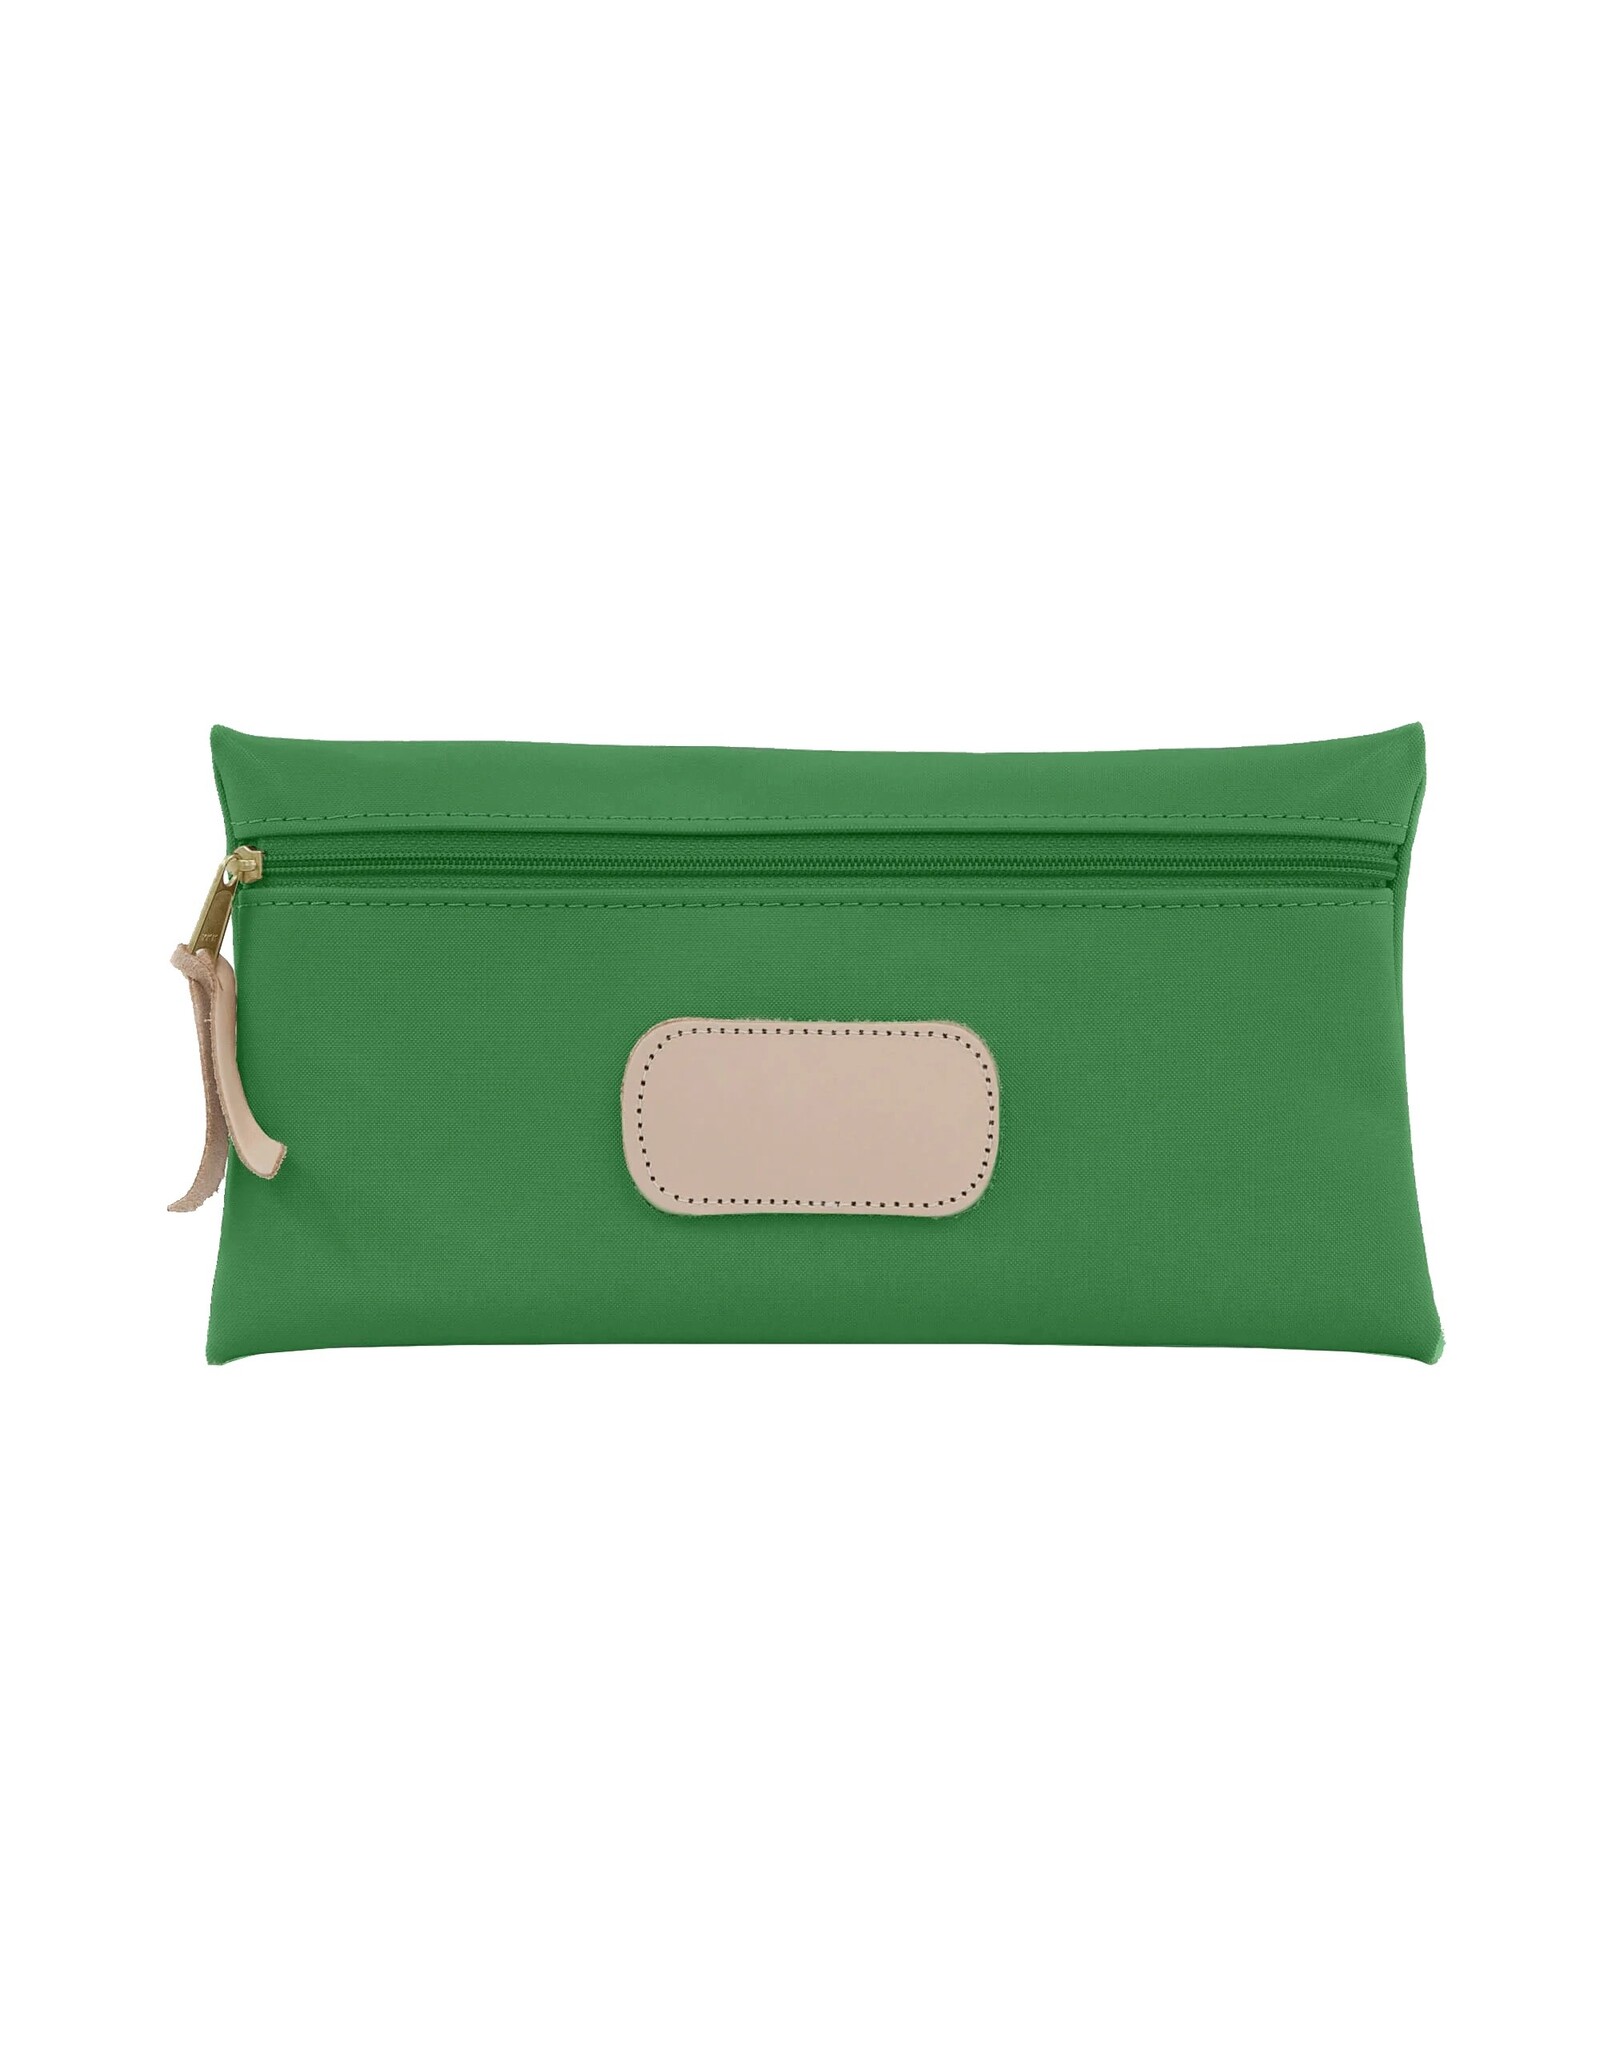 JH Large Pouch #806 Kelly Green